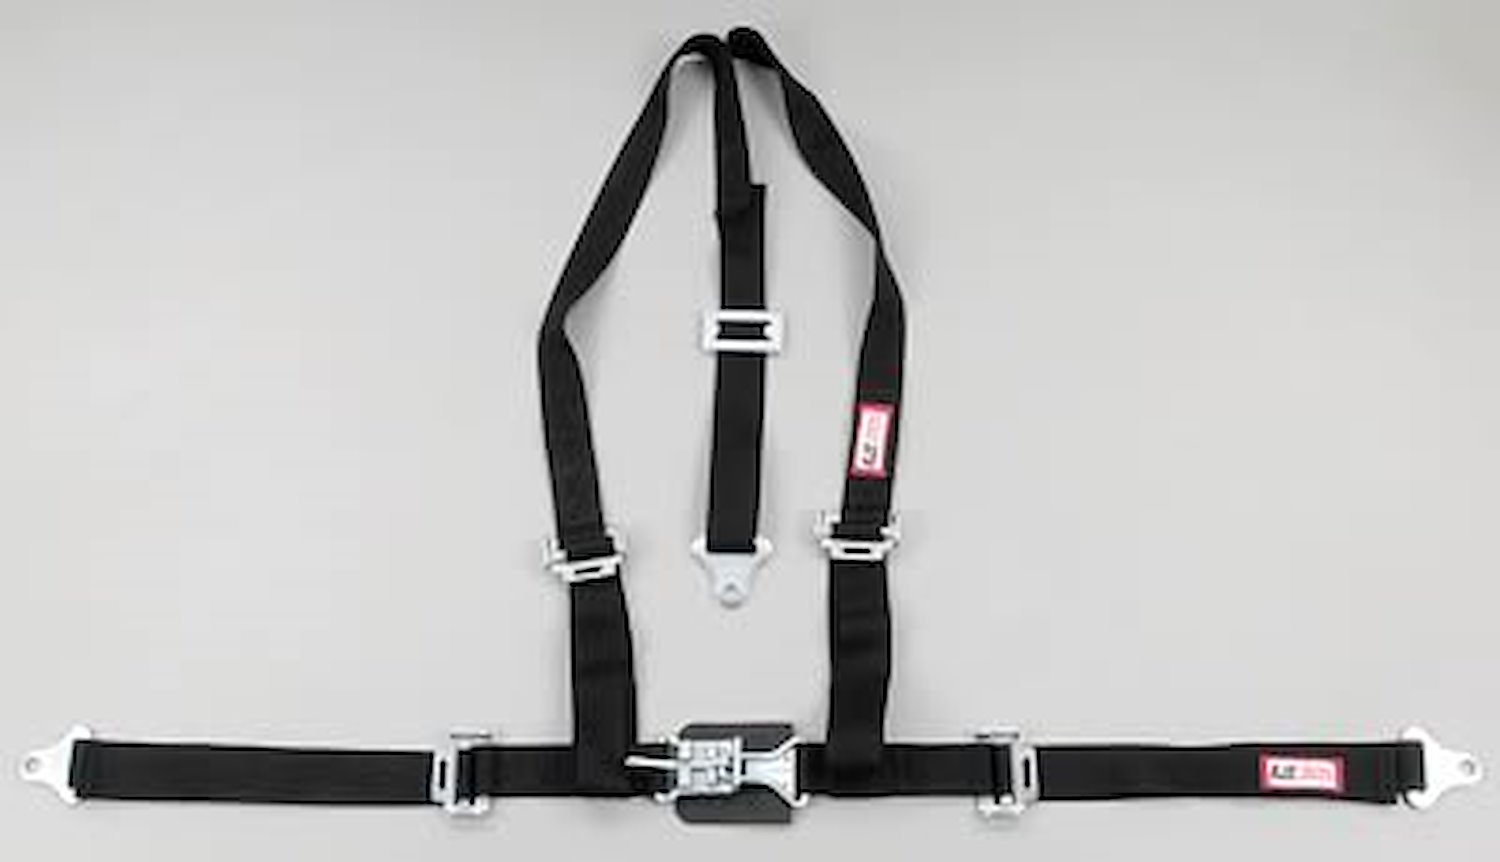 NON-SFI L&L HARNESS 3 PULL UP Lap Belt SEWN IN 2 Shoulder Harness V ROLL BAR Mount ALL SNAP ENDS BLUE